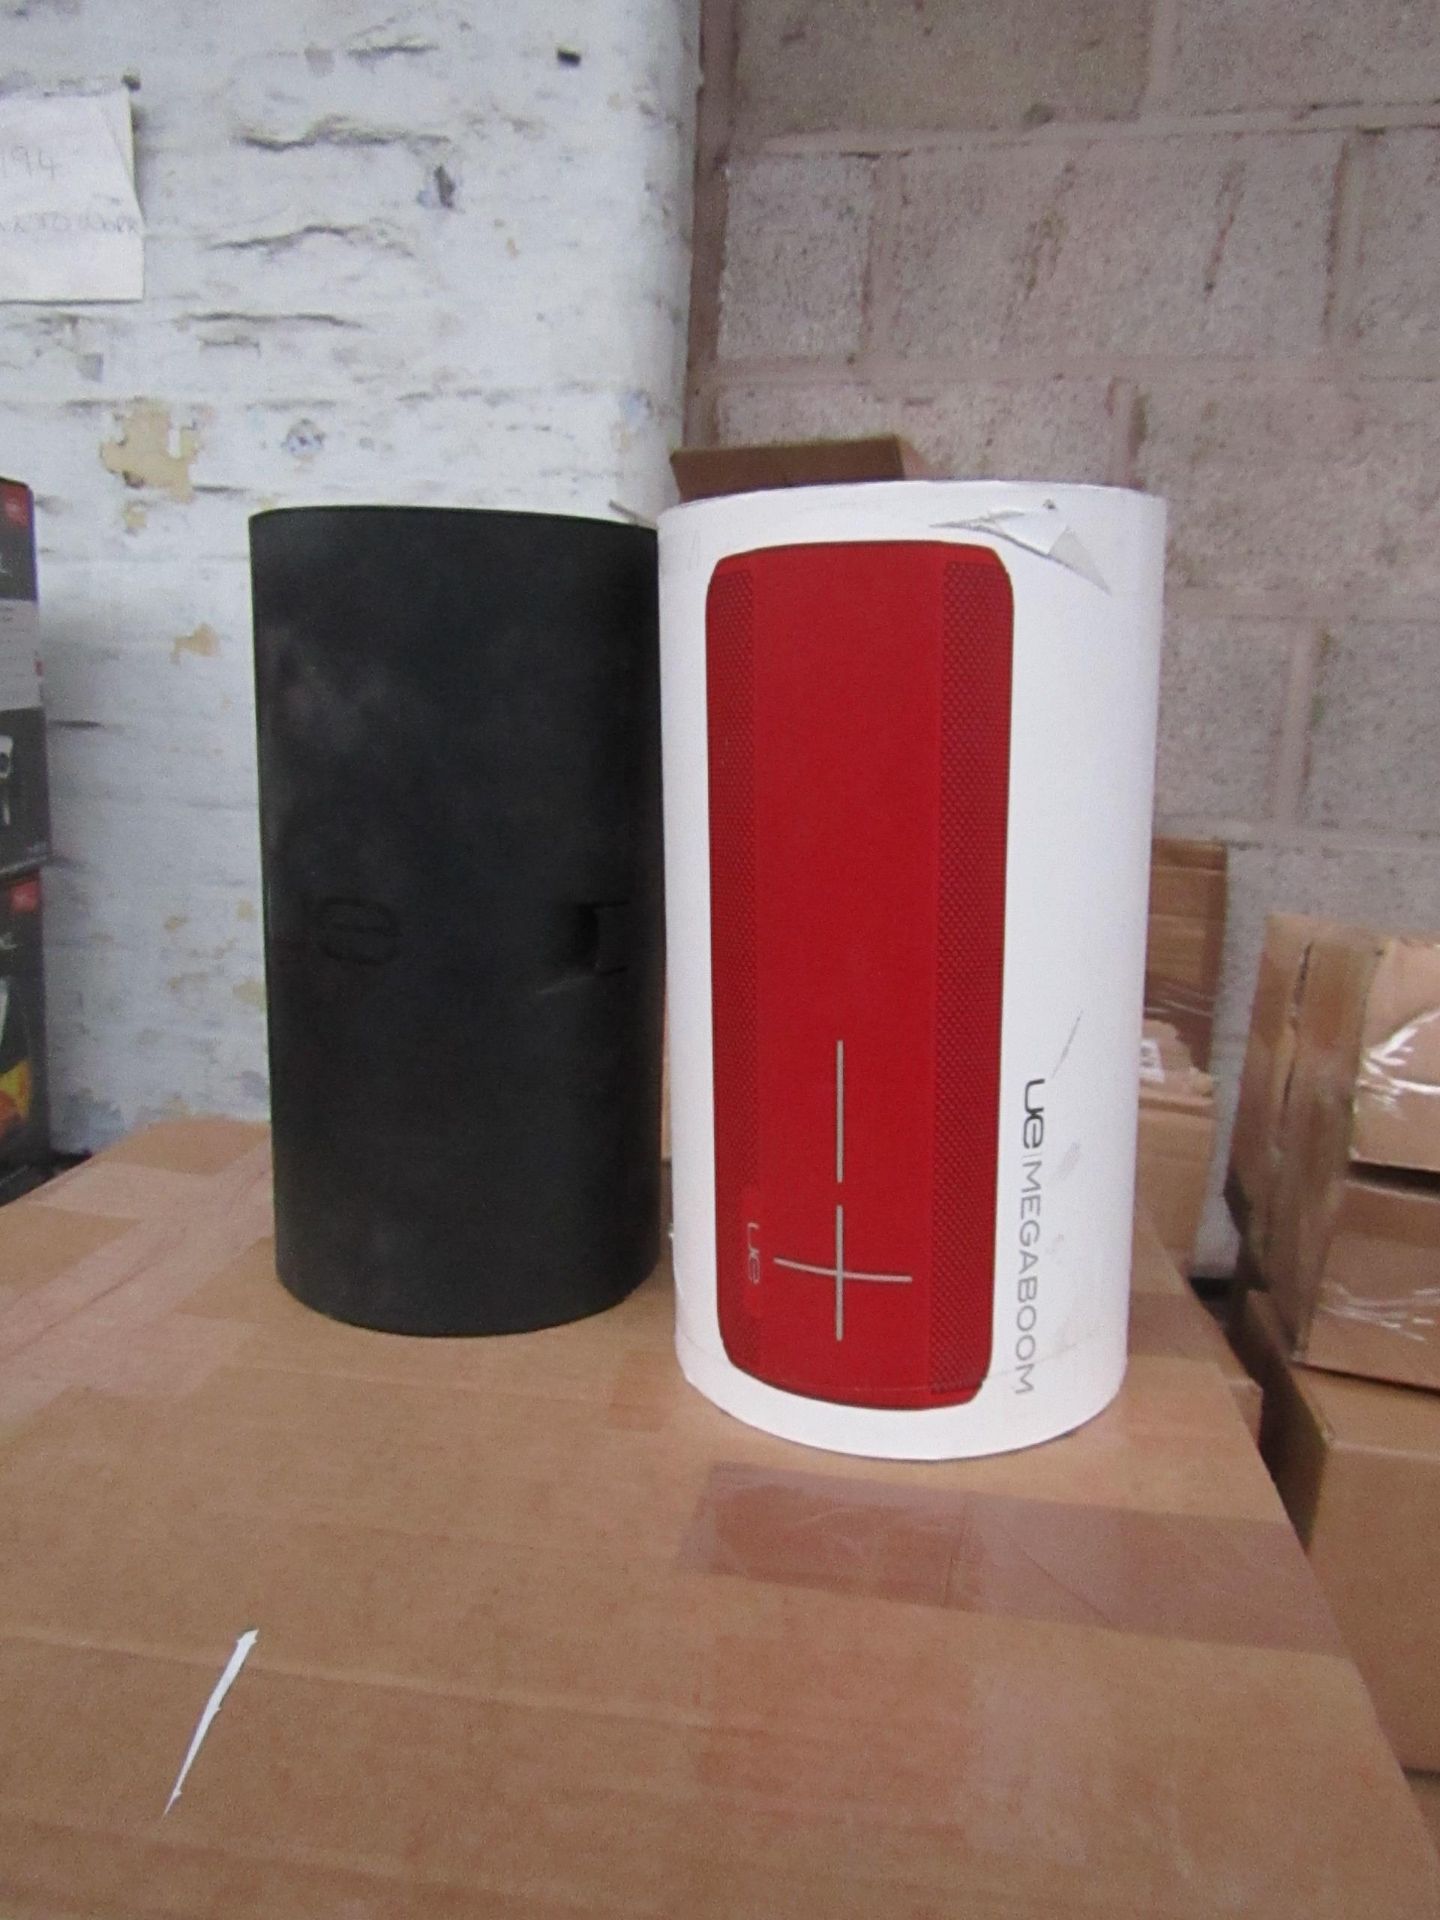 20X UE Megaboom speaker, unchecked. PLEASE NOTE, this lot is picked at random and you may receive